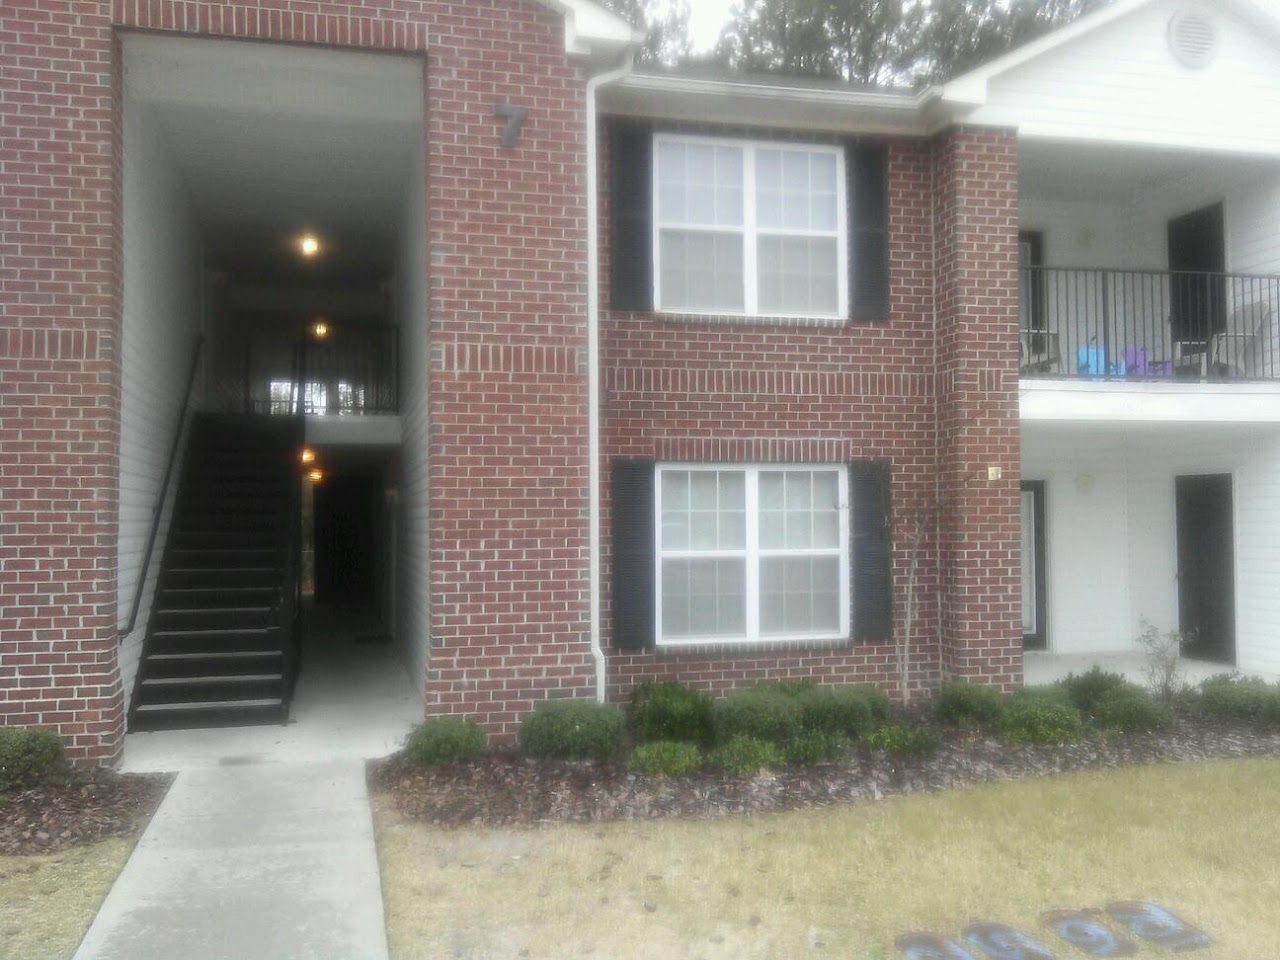 Photo of SUNSET POINTE. Affordable housing located at 1288 SUNSET BLVD JESUP, GA 31545